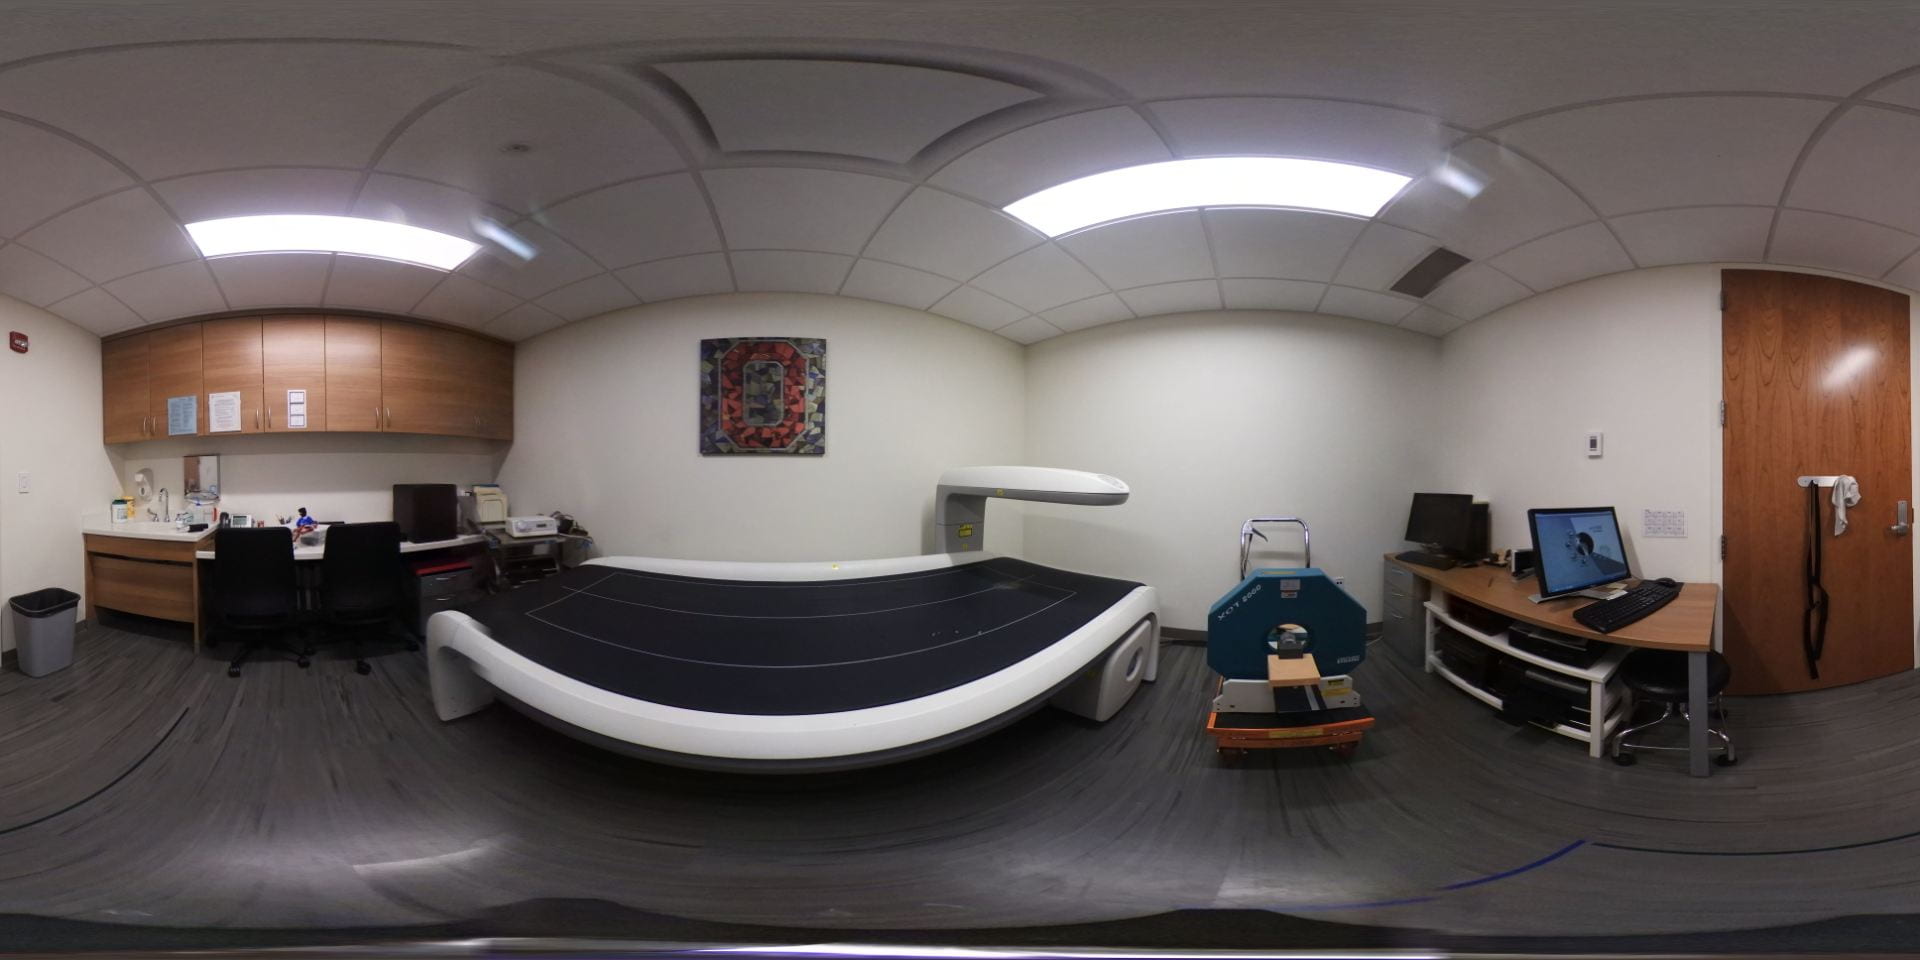 360 Image of the Sports Nutrition Lab